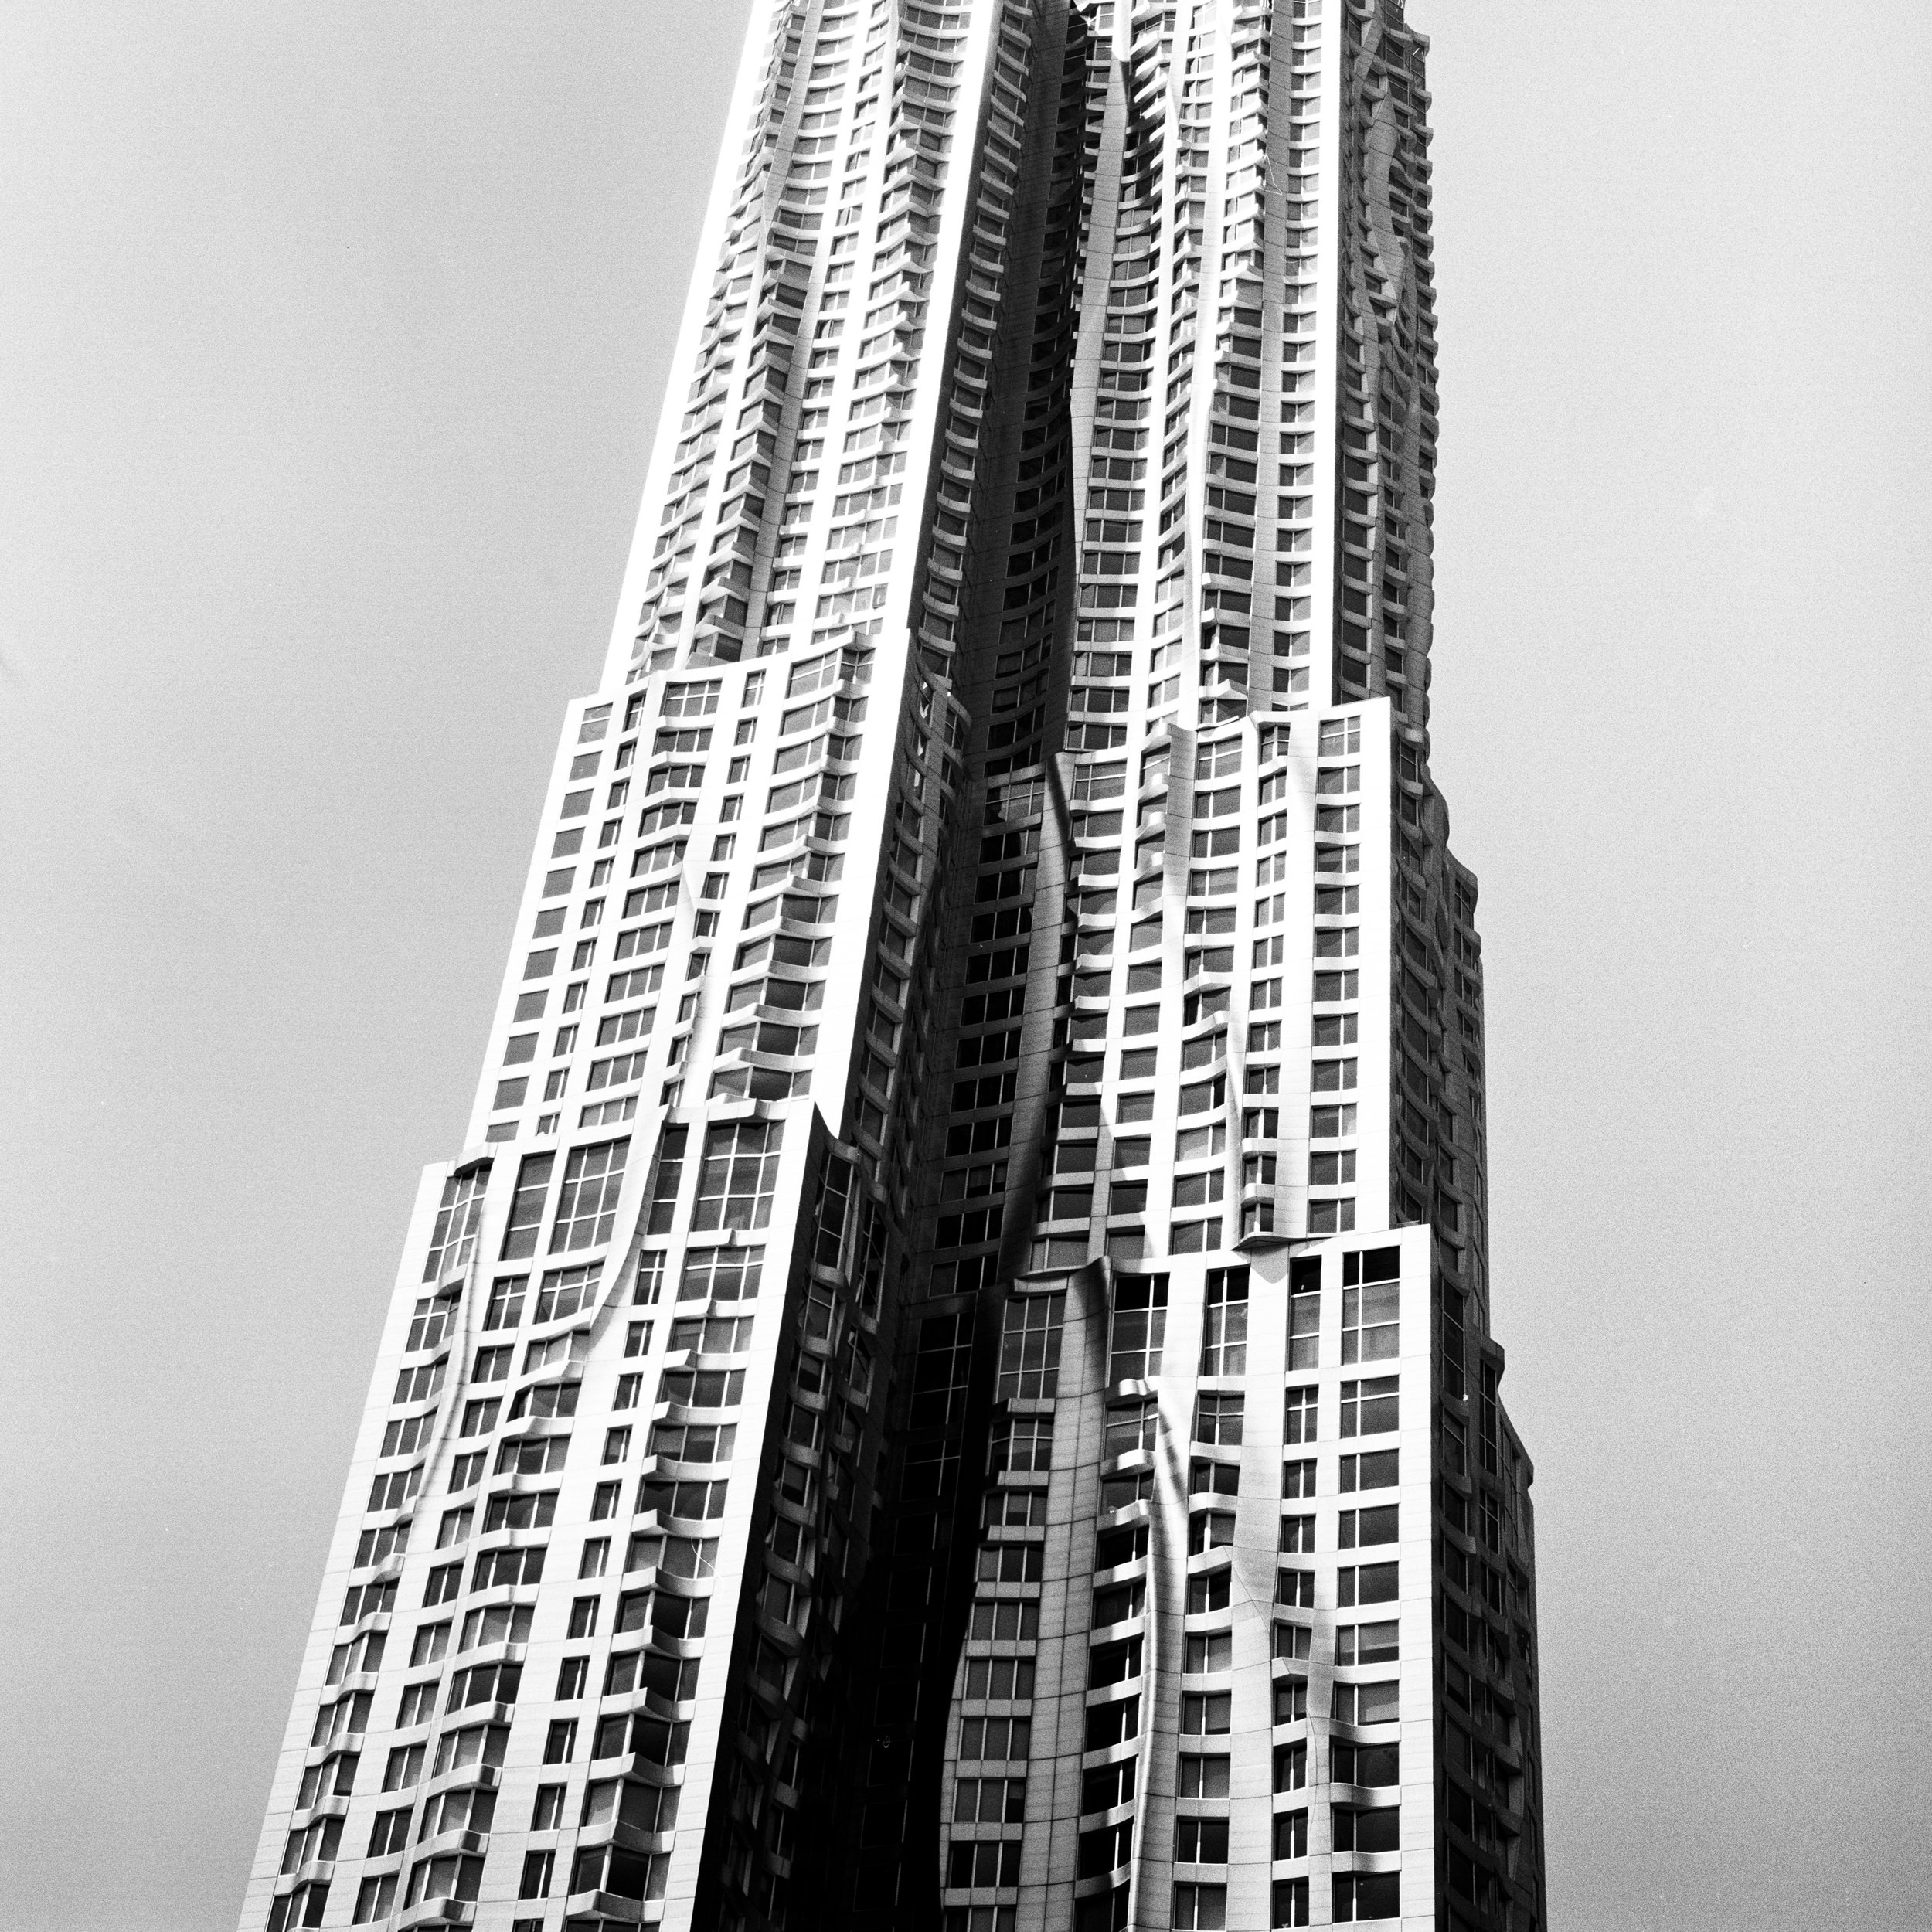 nycarchitecture-8.jpg